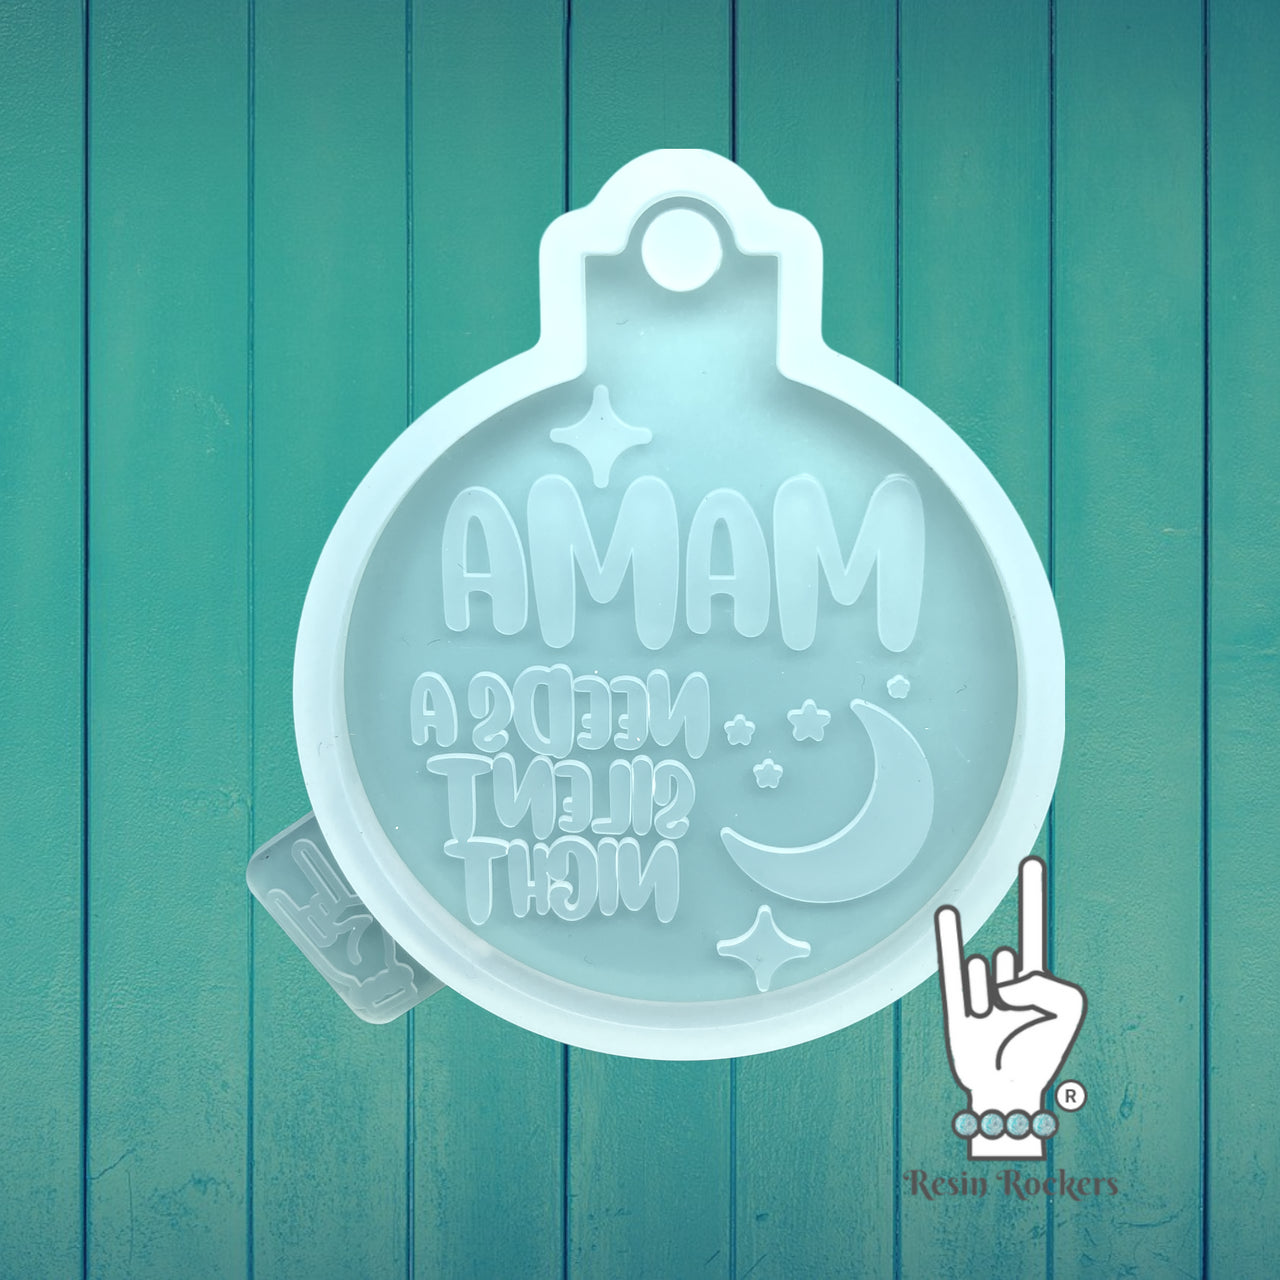 UV Safe Mama Needs a Silent Night Resin Rockers Exclusive Ornament Mold for UV and Epoxy Resin Art